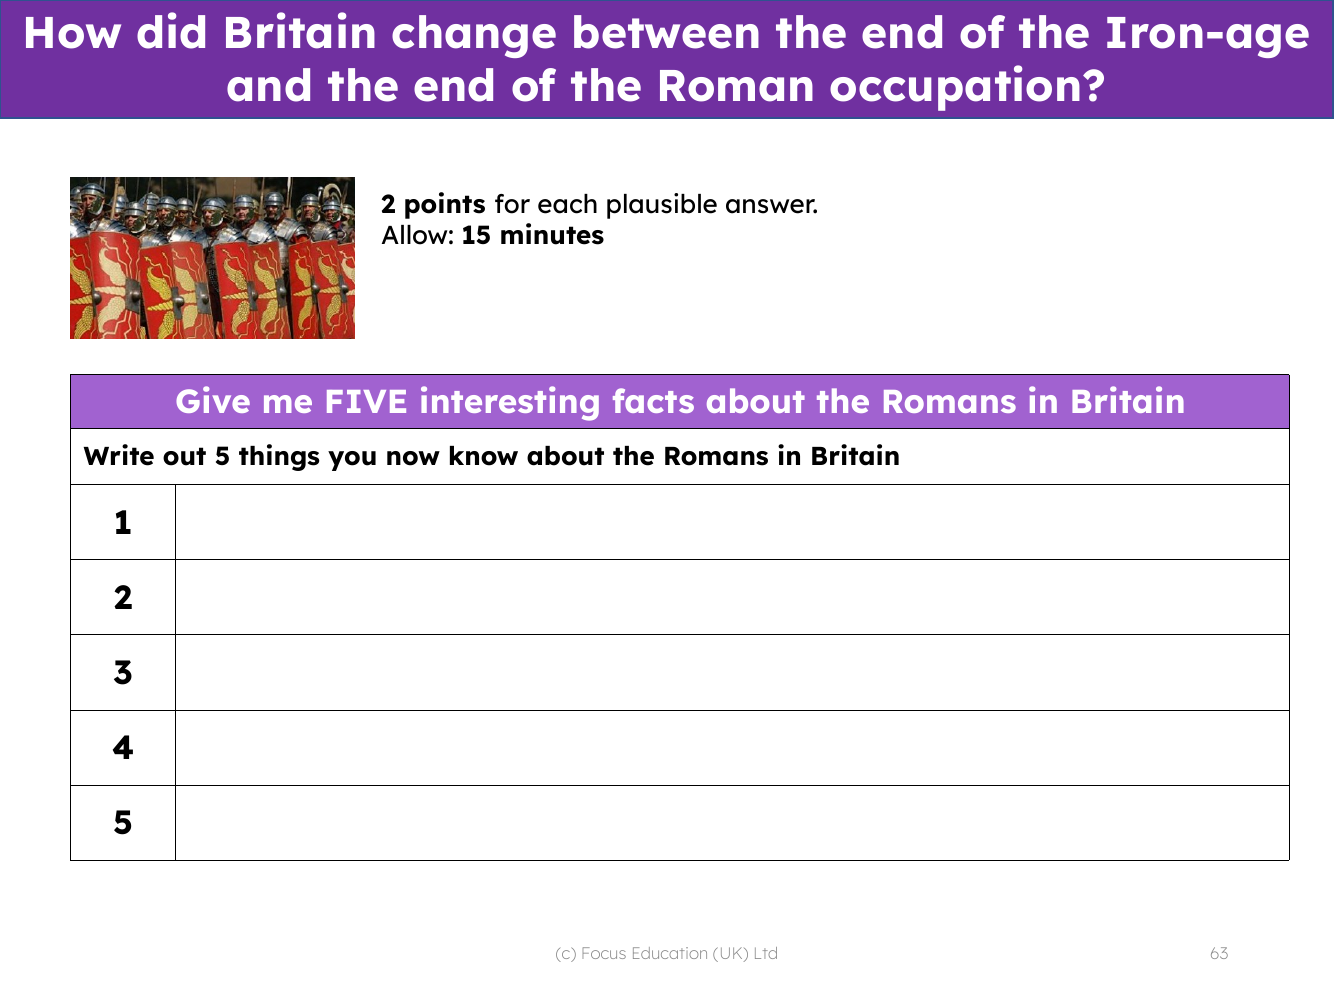 Give me 5 - Facts about the Romans in Britain's